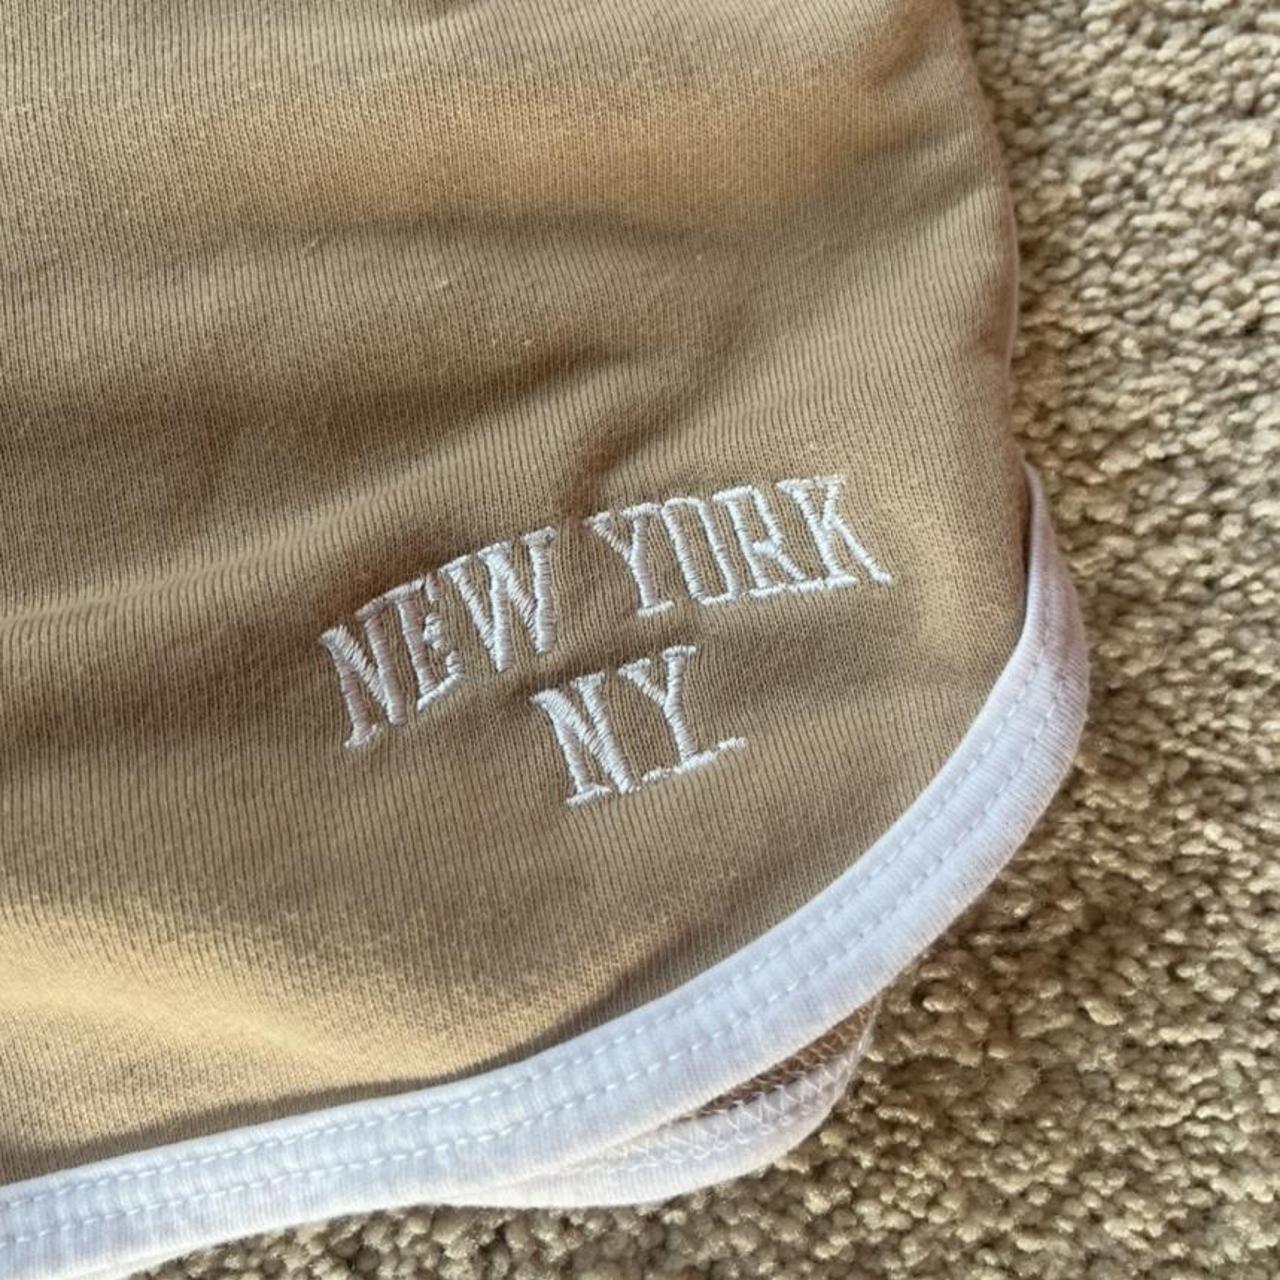 Product Image 3 - 🤎tillys tan new york shorts🤎
-size